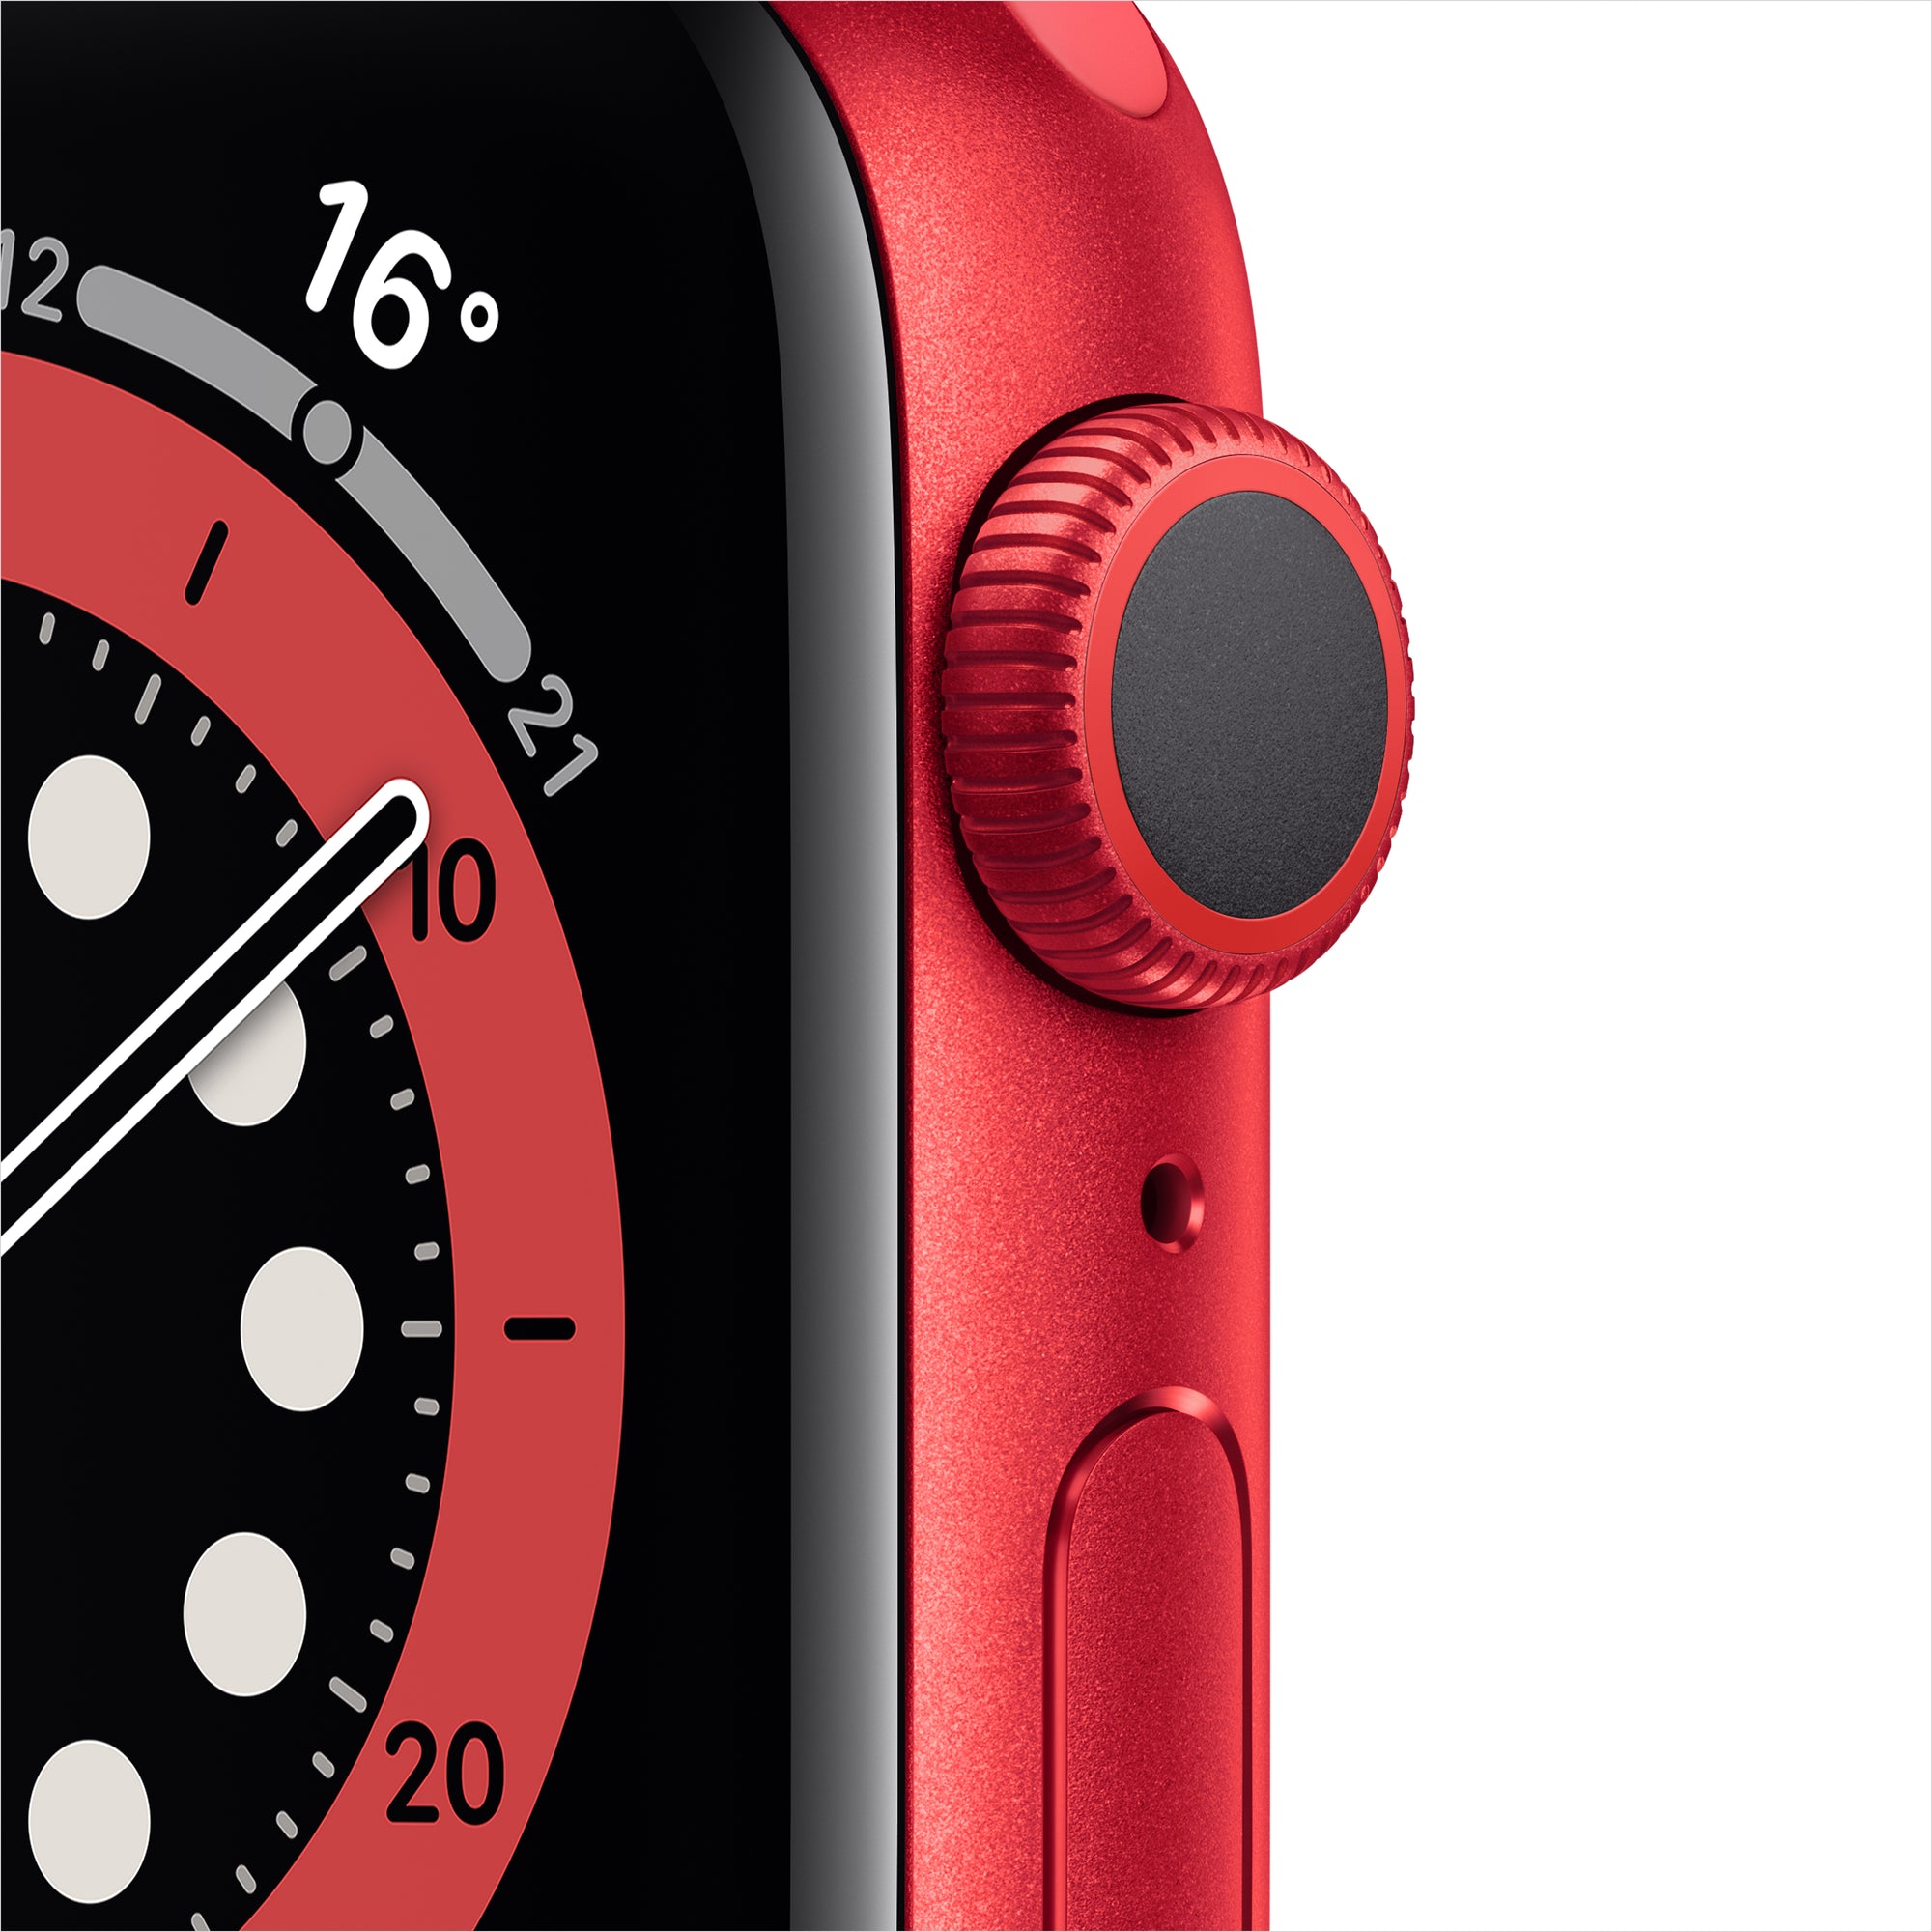 Apple Watch Series 6 M02T3VC/A Cellular 40mm Red